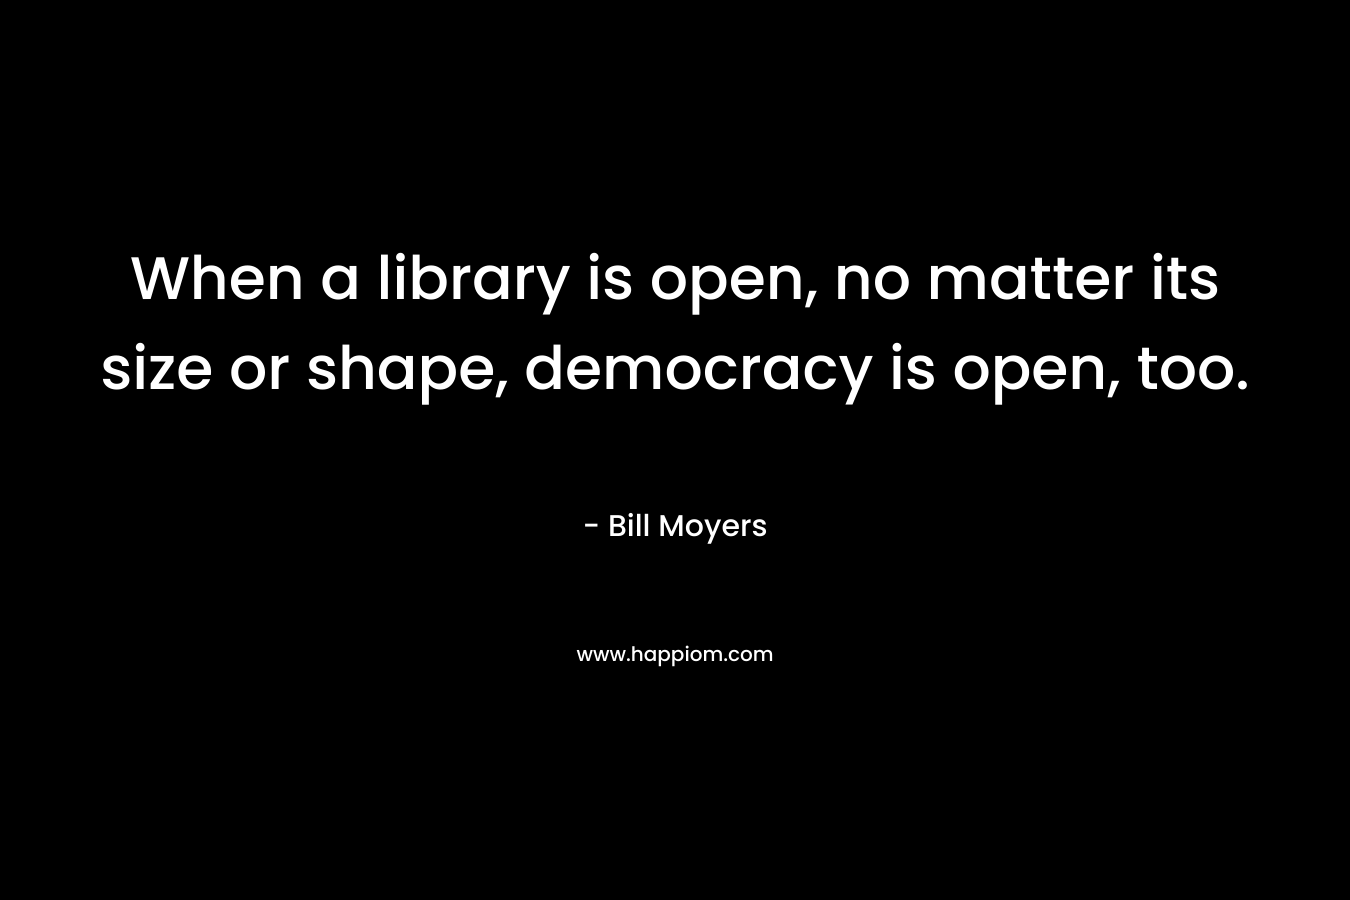 When a library is open, no matter its size or shape, democracy is open, too.